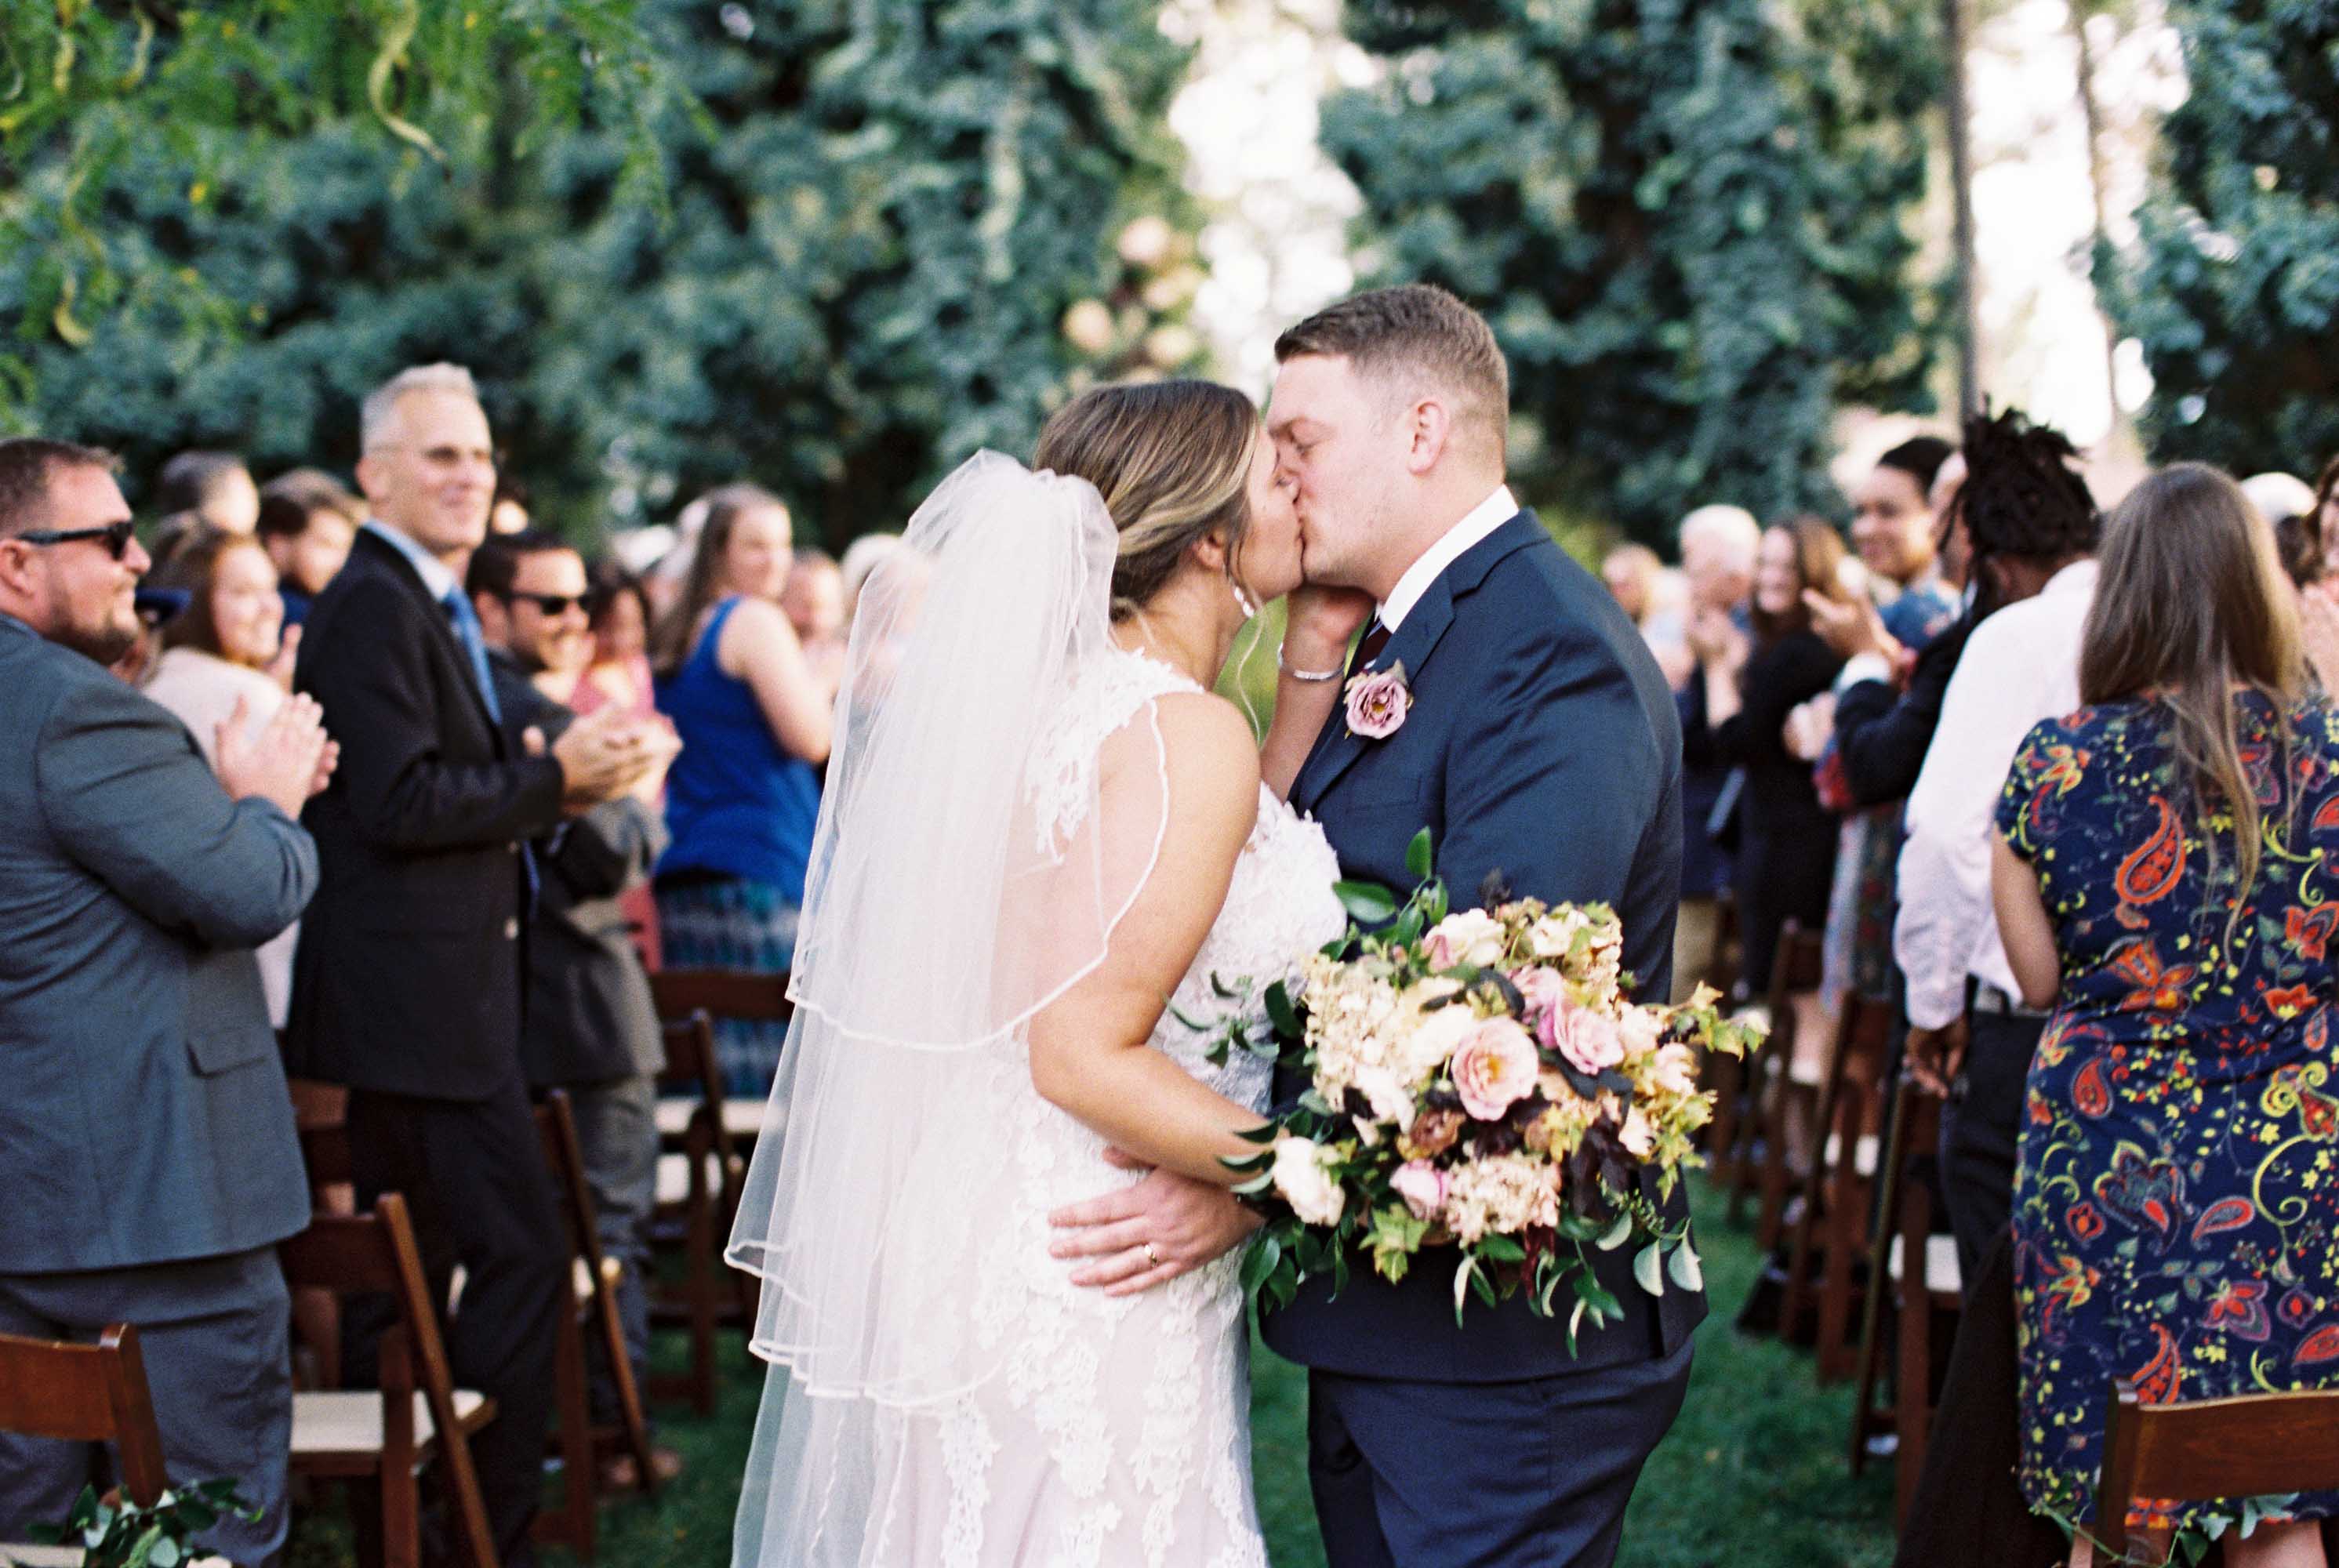 Berry toned, fall wedding with garden inspired floral design at Arbor Crest Winery in Spokane, Washington | Photographed by Seattle and Destination Wedding Photographer Anna Peters